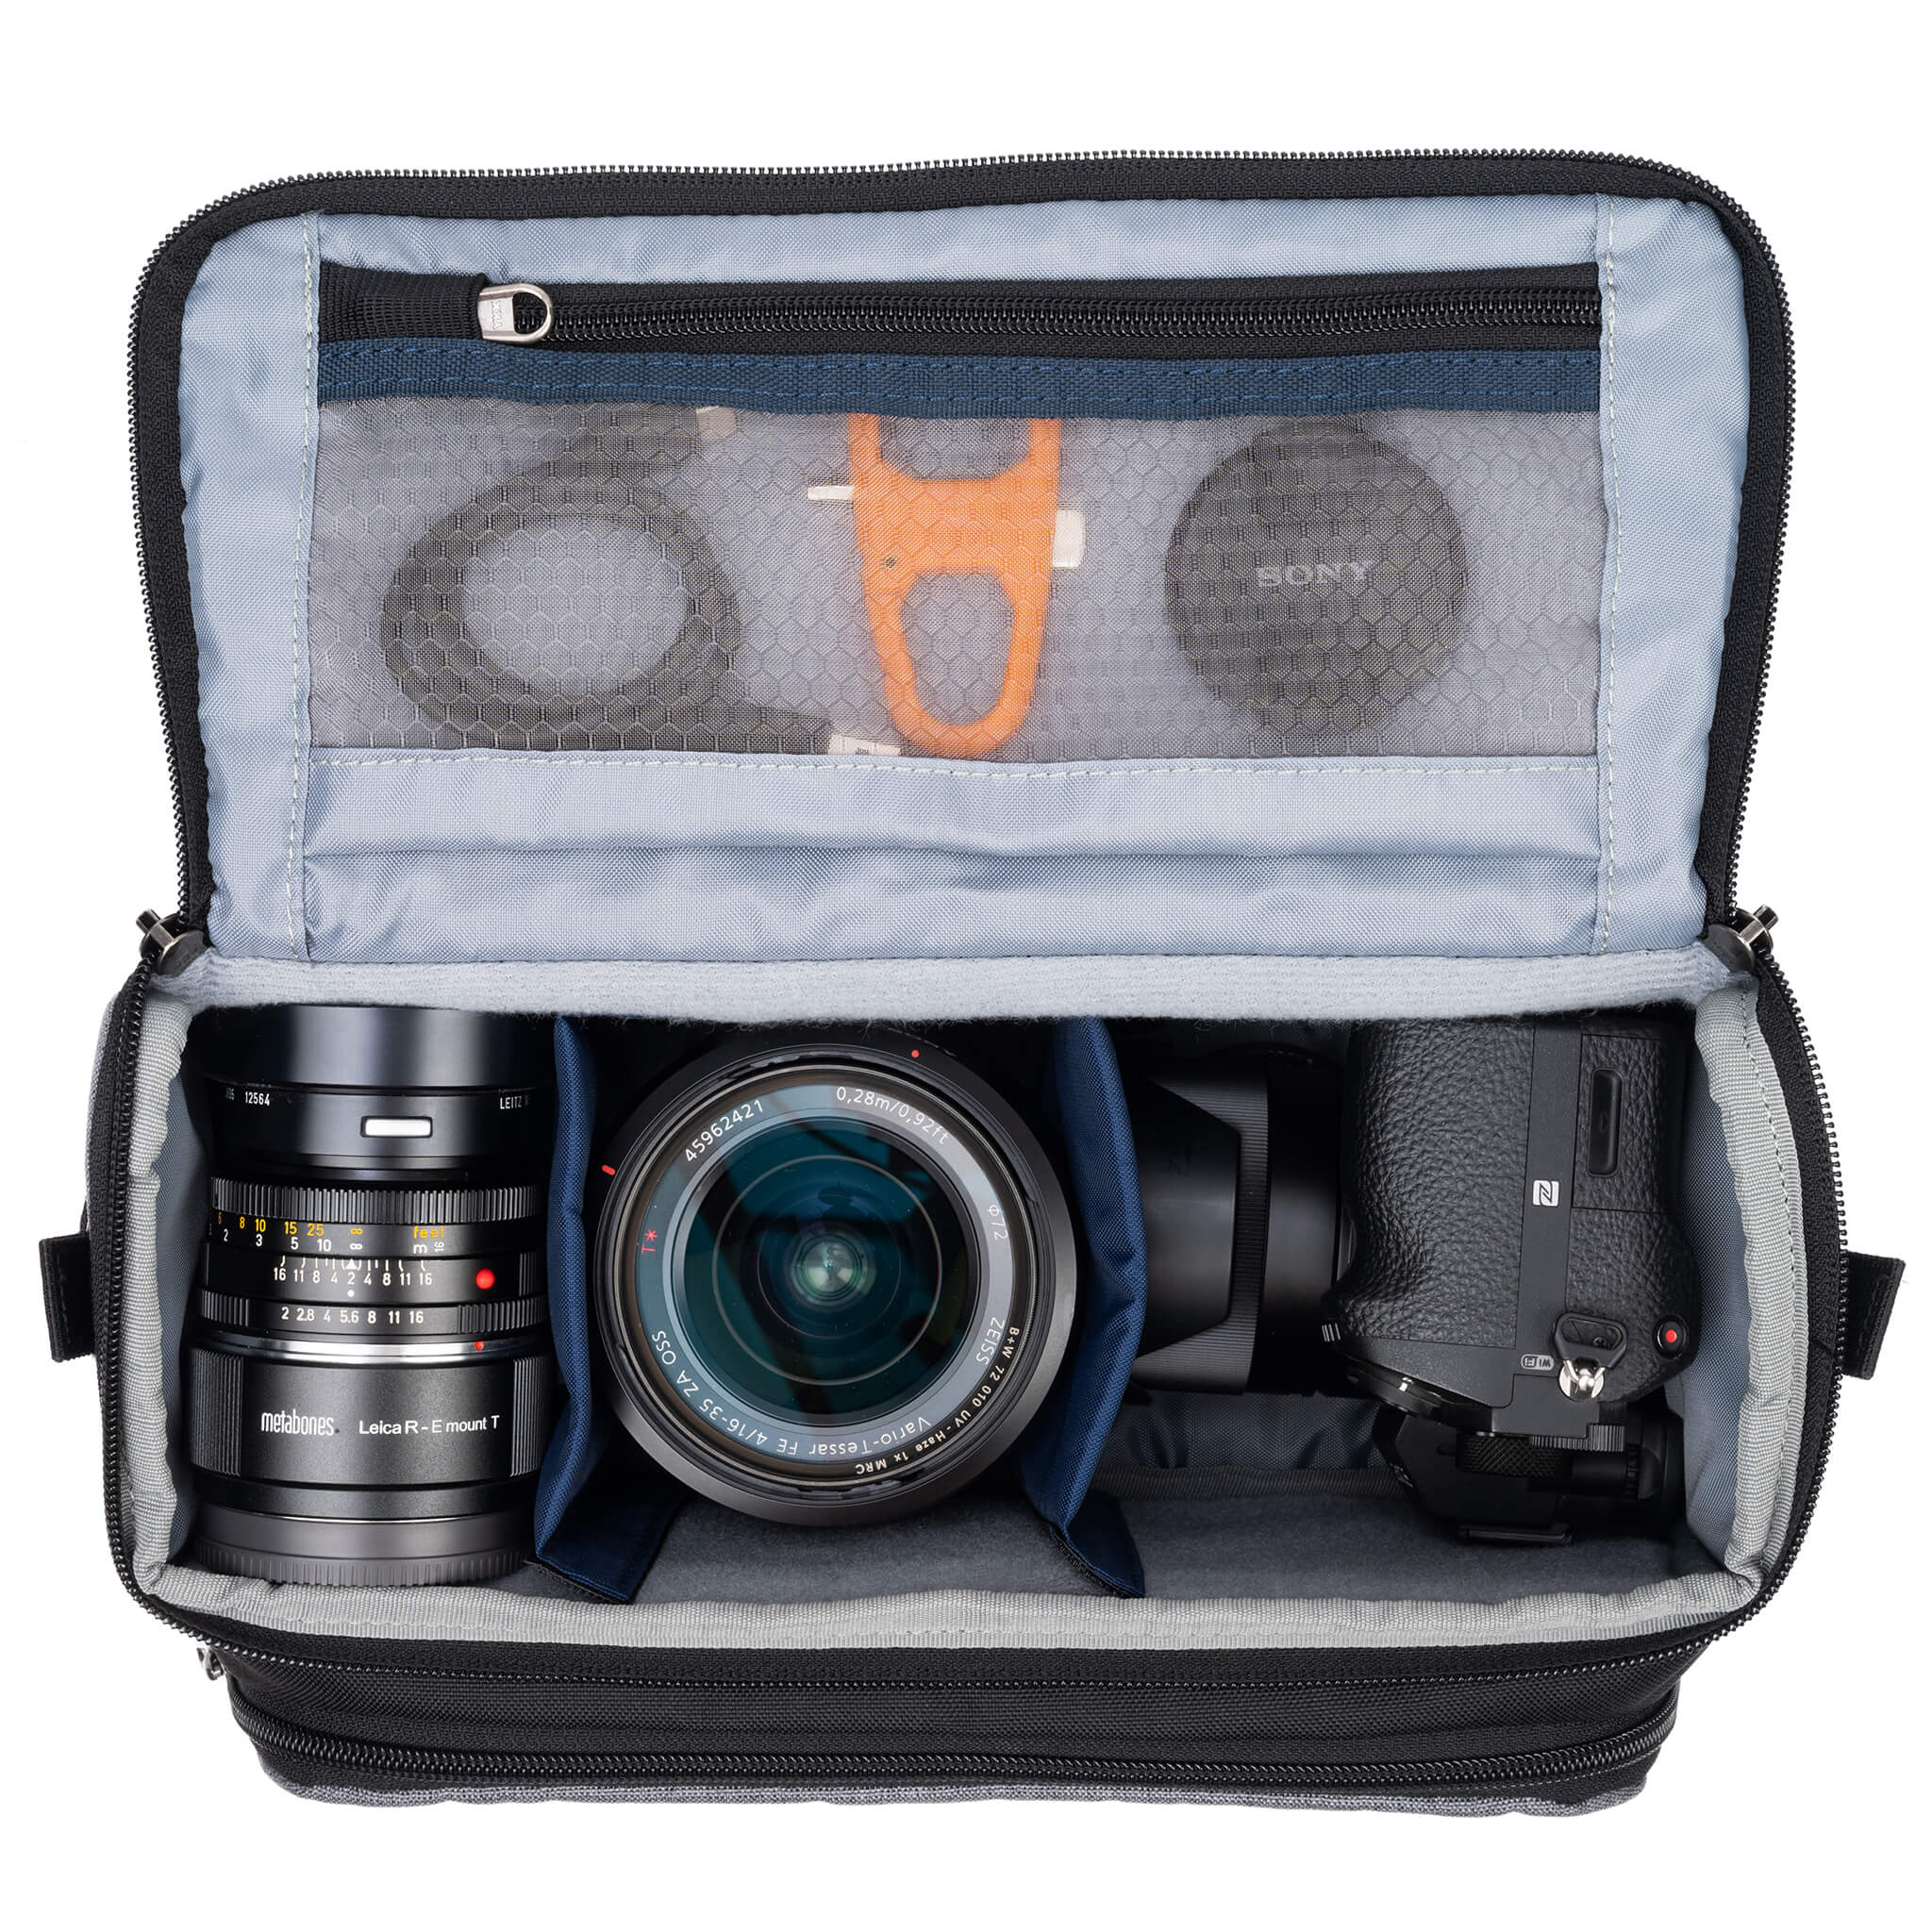 Fits one standard mirrorless body plus 2 to 3 lenses: short to medium f/4 zooms or short to medium primes.